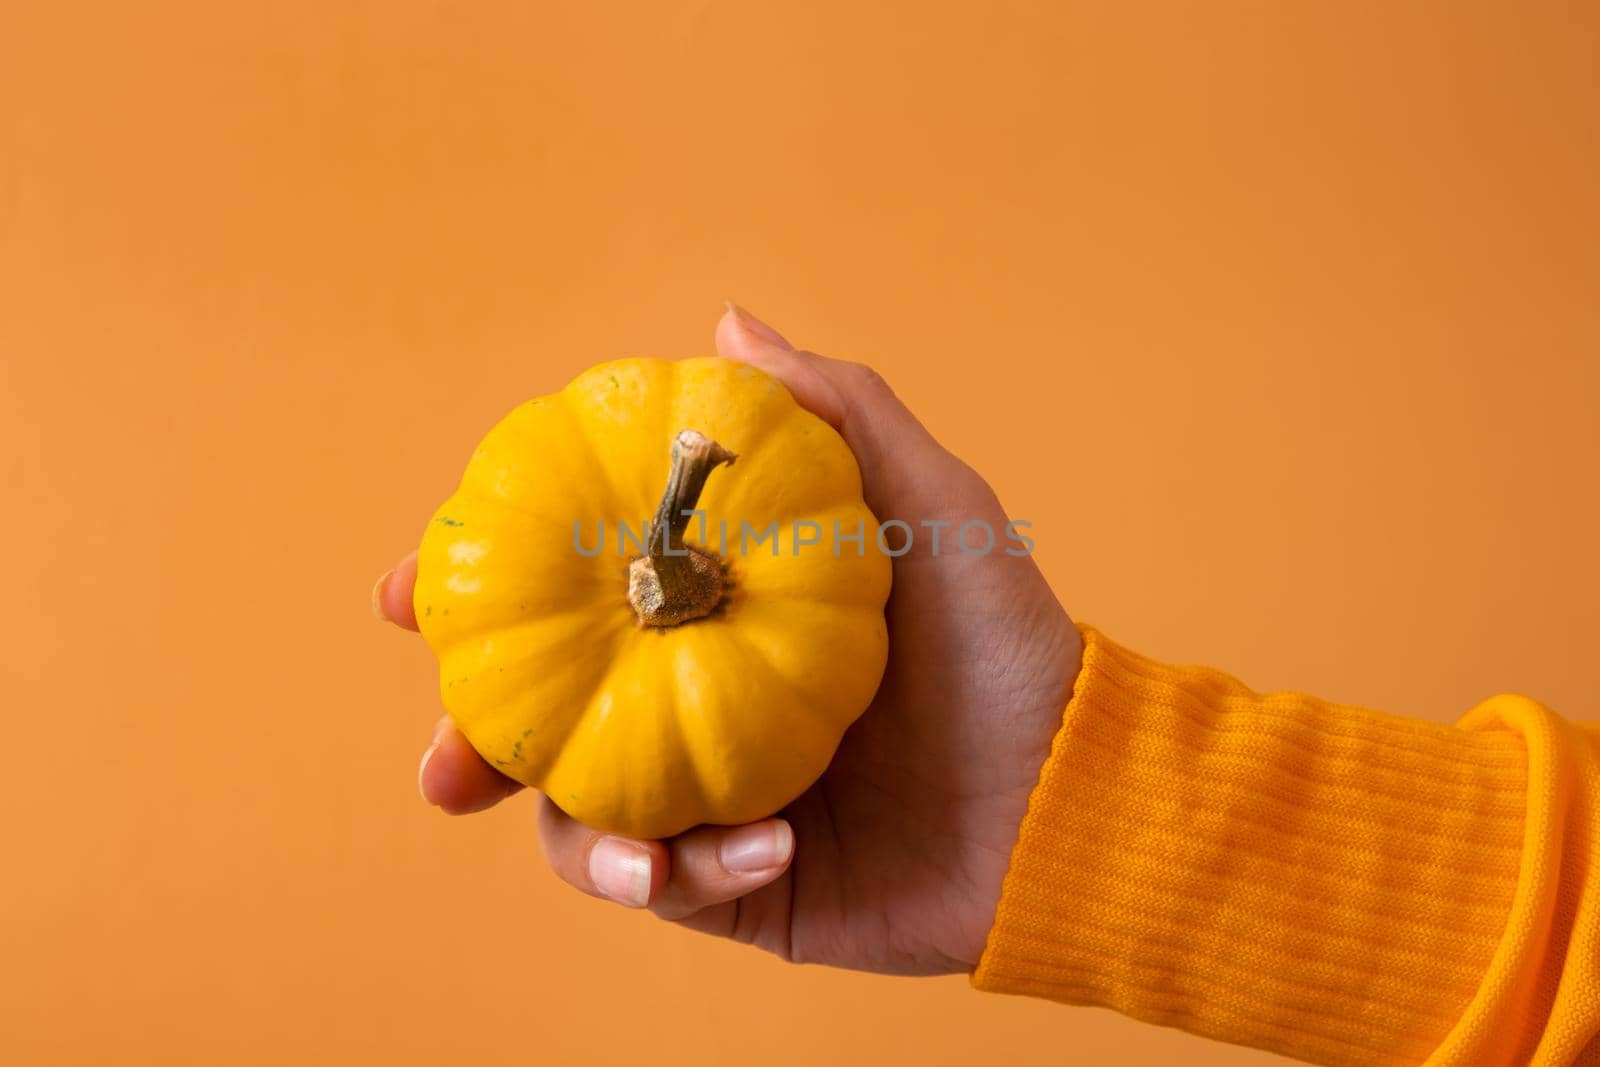 A small decorative orange pumpkin in a woman's hand in a sweater on an orange background. by ssvimaliss